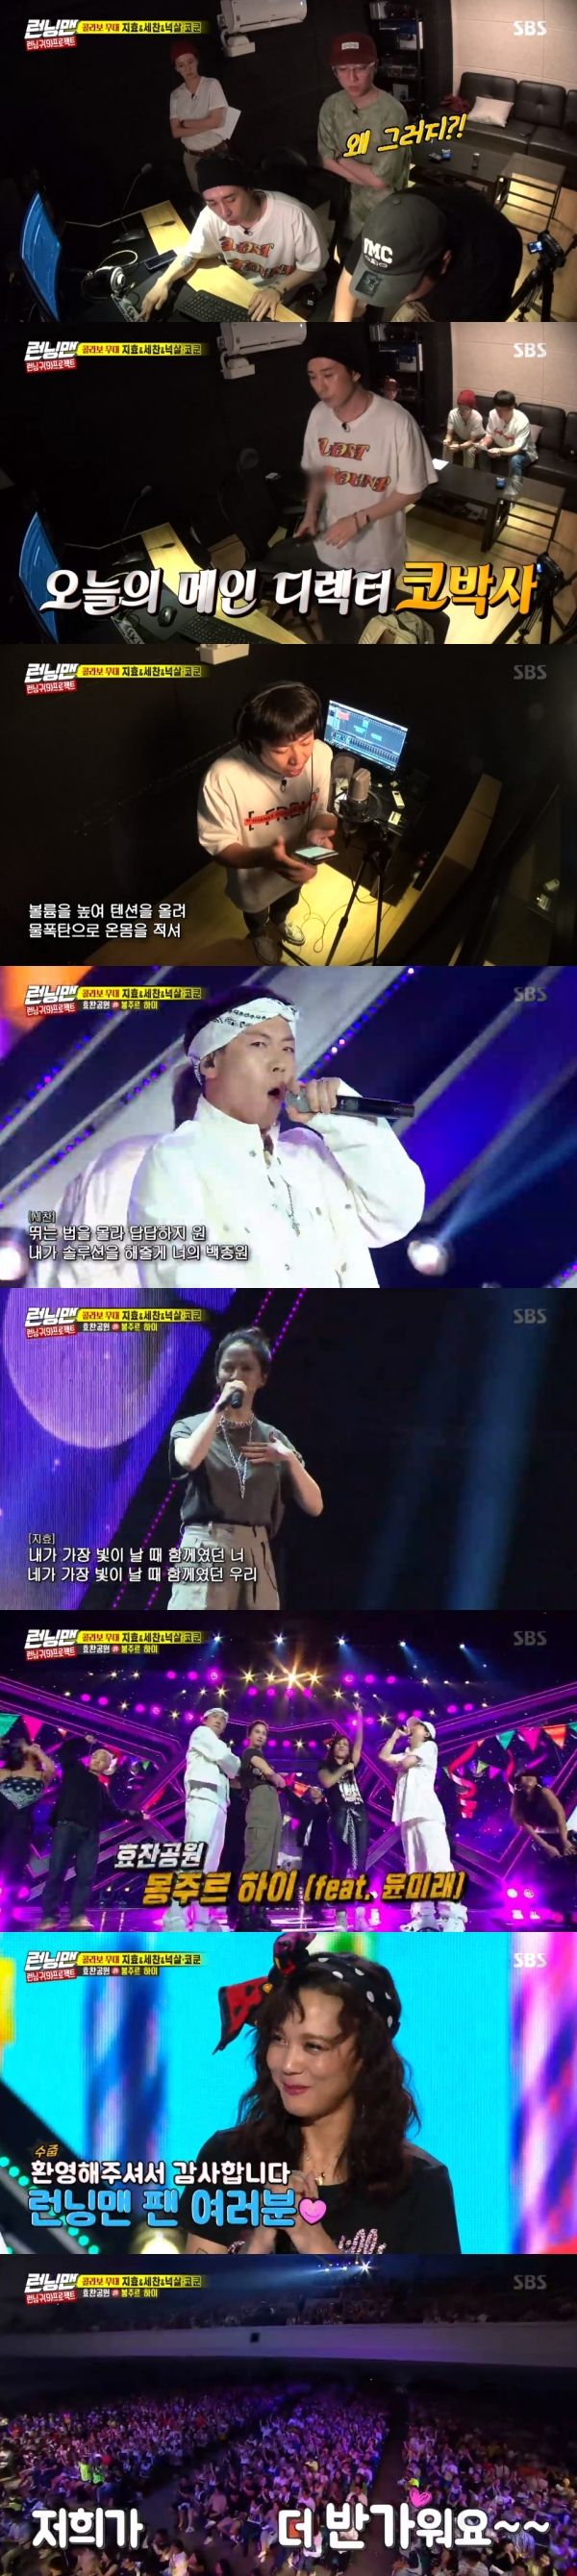 Yoon Mi-rae launched a stage-supporting fire at Hyochan ParkOn SBS Running Man broadcasted on the 22nd, Hyo Chan Park in front of fans with Running Zone (9) Project showed off his brilliant rap skills on stage with Yoon Mi-rae.Song Ji-hyo, Yang Se-chan, Nucksal and Code Kunst, who formed Hyo Chan Park on the day, visited the recording room ahead of the performance on stage.Yang Se-chan, who is about to record as the main director of Code Kunst, looked nervous.Code Kunst said, No matter how good you are, I will drag you three times. Yang Se-chan said, I have to throw three times in the first half.First, Yang Se-chan, who made the recording, said, As soon as I put on my headphones, Im Tididic. Code Kunst laughed, saying, Its a handy style.But Yang Se-chan, who is on the recording, finished smoothly with a serious attitude.The next recording was Song Ji-hyo; Song Ji-hyo, who entered in a tense manner, made frequent mistakes.So Code Kunst said of Song Ji-hyos voice: Its so trembling, lets do it again.Nucksal encouraged Song Ji-hyo into the recording studio to relax.On the other hand, Hyochan Park, which was on stage, captivated Sight with its brilliant rap skills and stage manners.Nucksals addictive refrain drew fans attention: Yang Se-chan showed off his duo rap skills with Nucksal.Song Ji-hyo, who appeared on the lift, captured Sight with authentic lyrics.By the end of the stage, Yoon Mi-rae was on fire, and the audience cheered on the surprise appearance of Yoon Mi-rae, and the stage of Hyo Chan Park was finished.